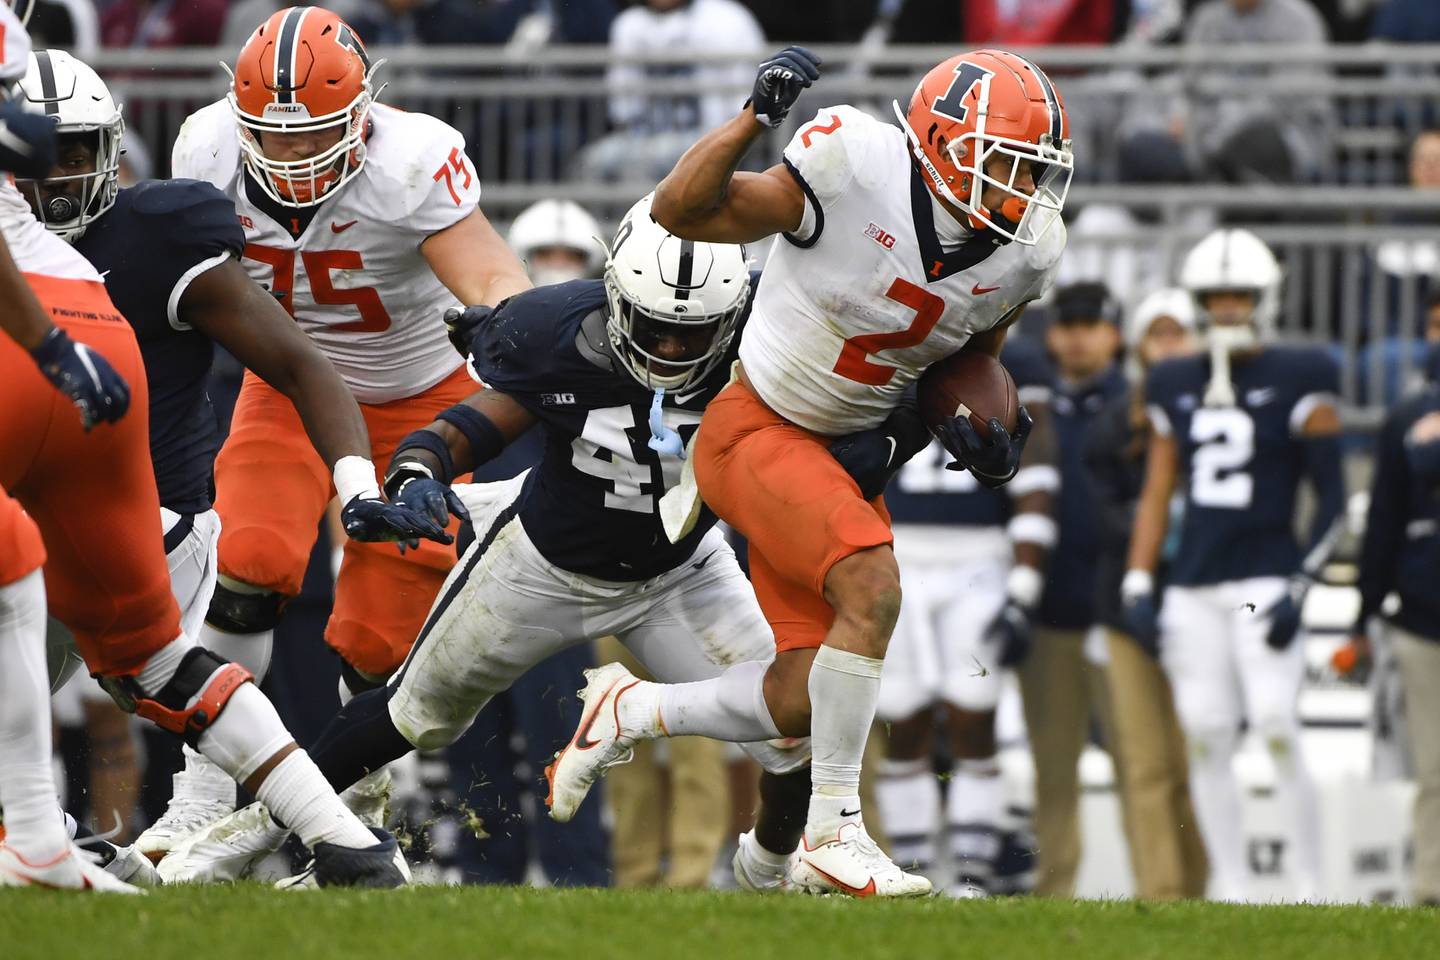 Illinois running back Chase Brown (2) sprints past Penn State linebacker Jesse Luketa on Oct. 23, 2021, in State College, Pa. 